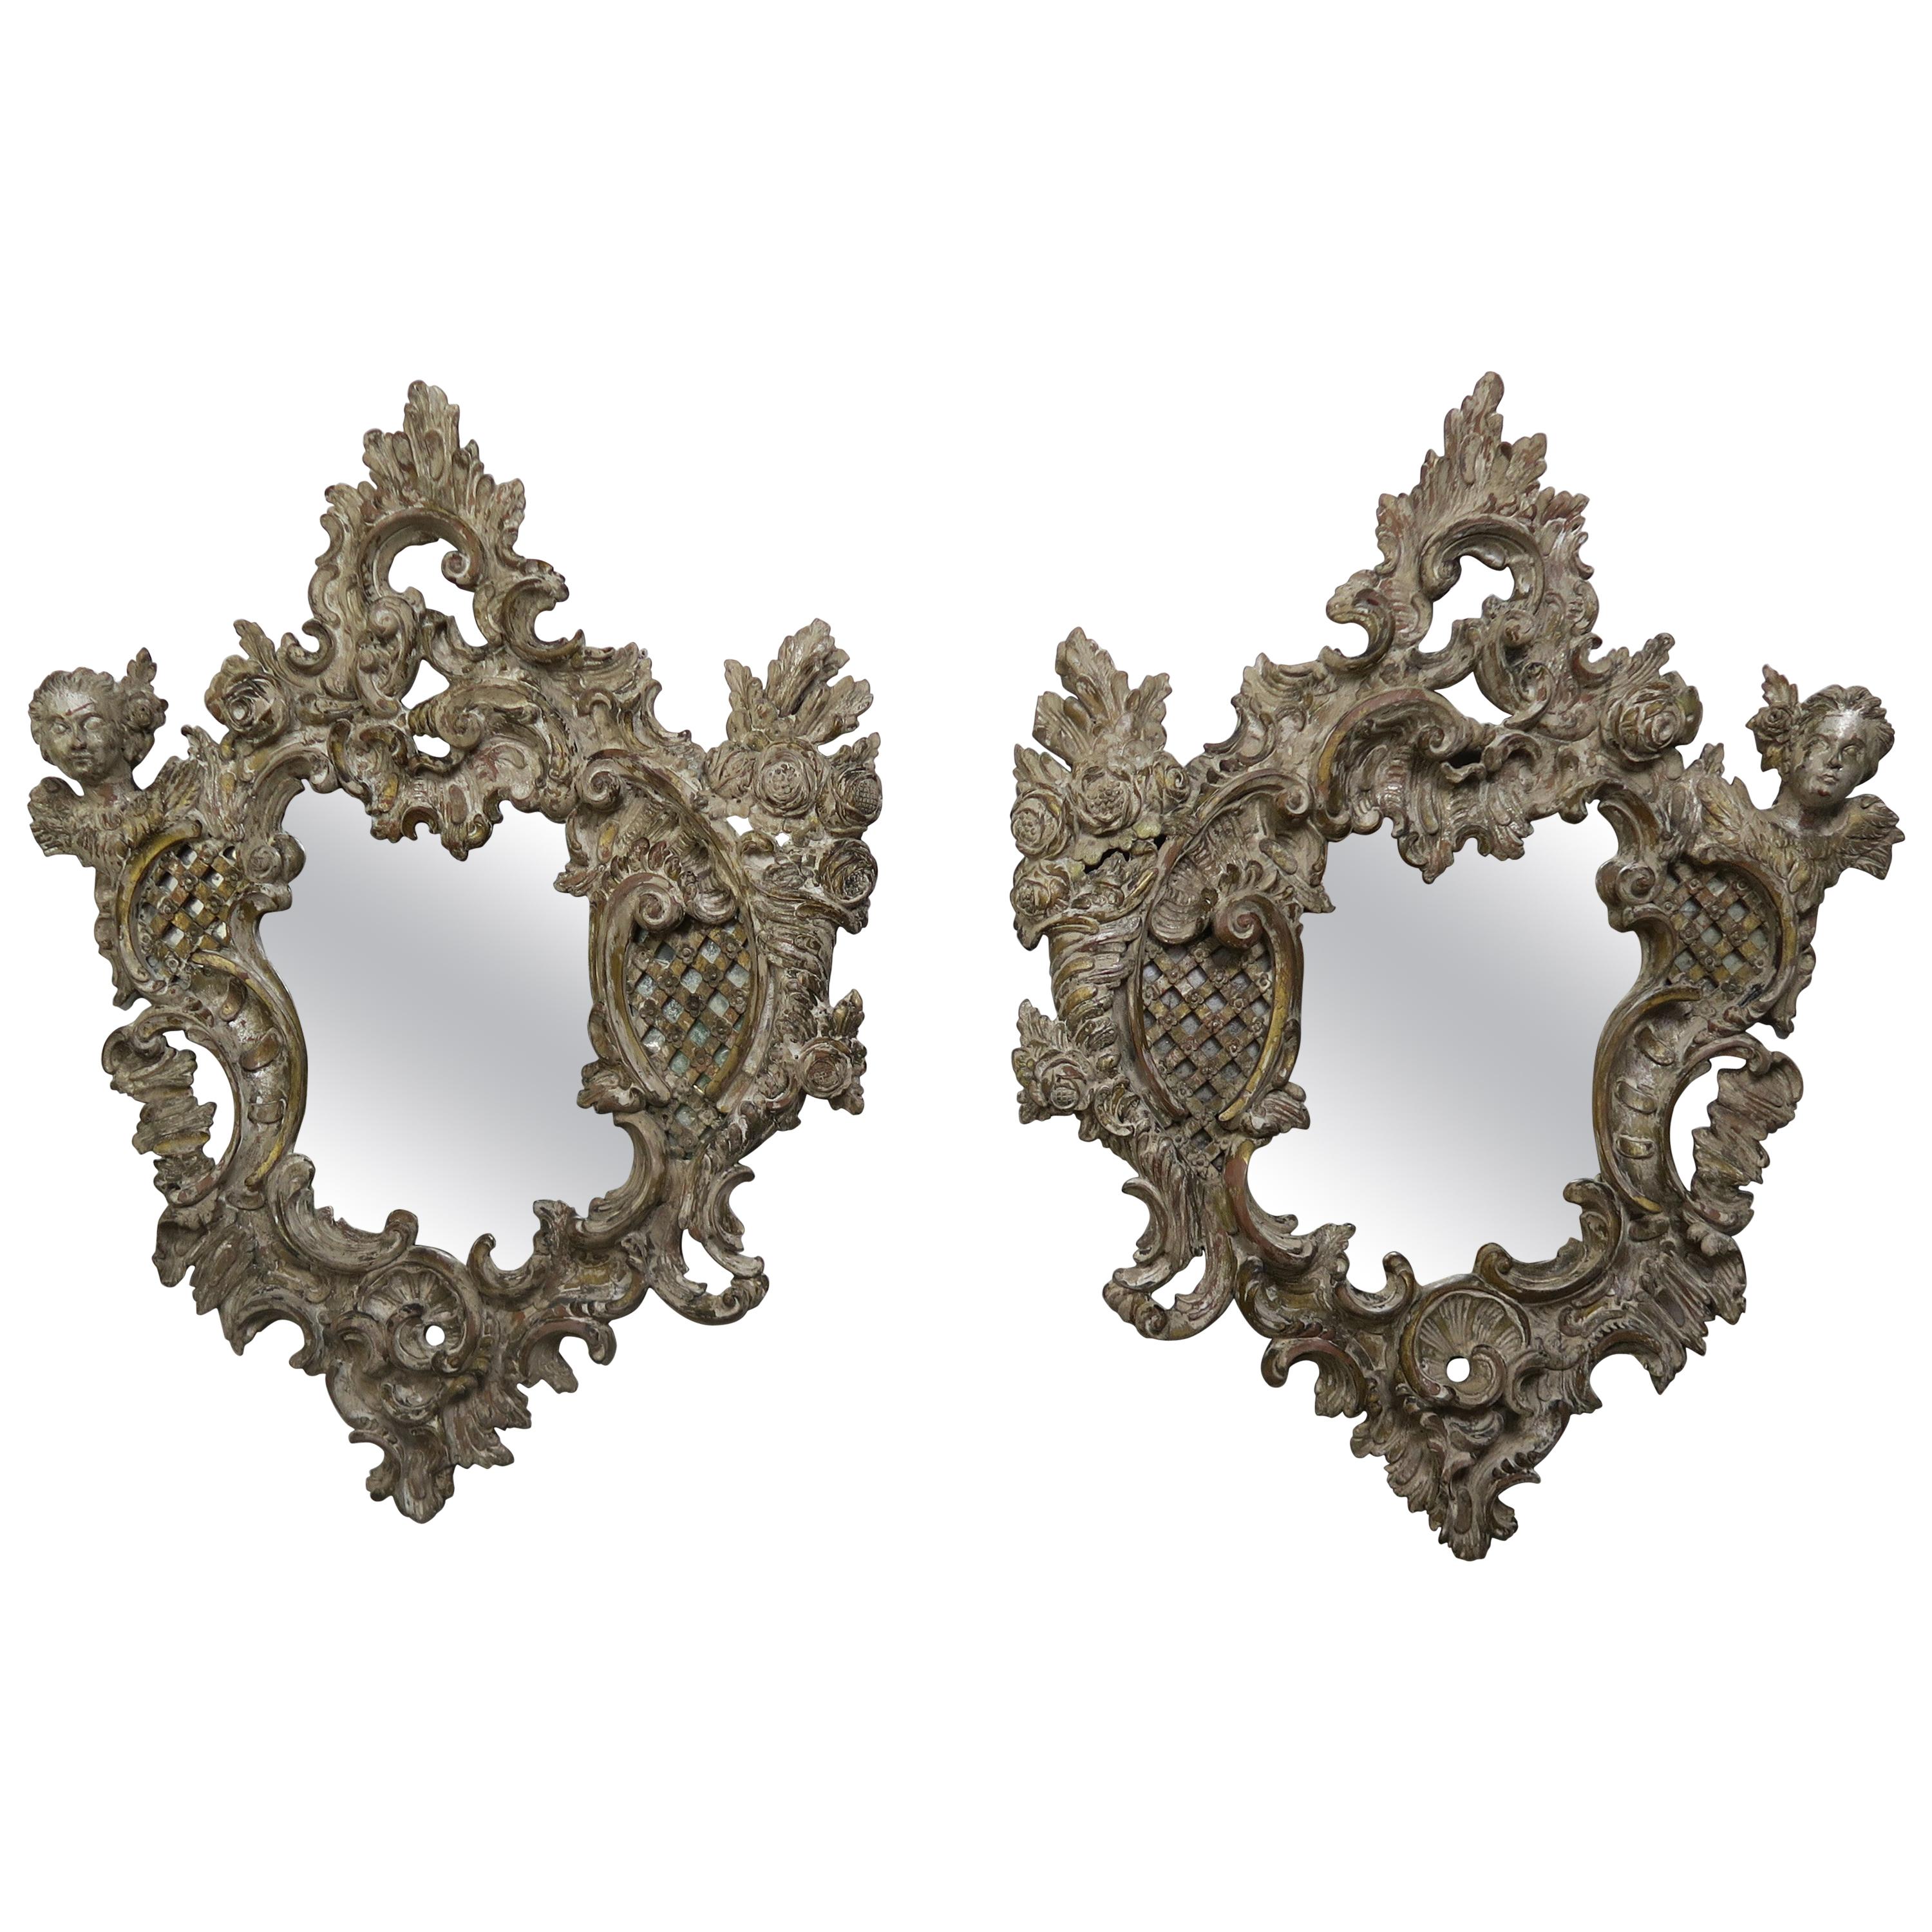 Pair of 19th Century Rococo Style Italian Carved Mirrors with Cherubs